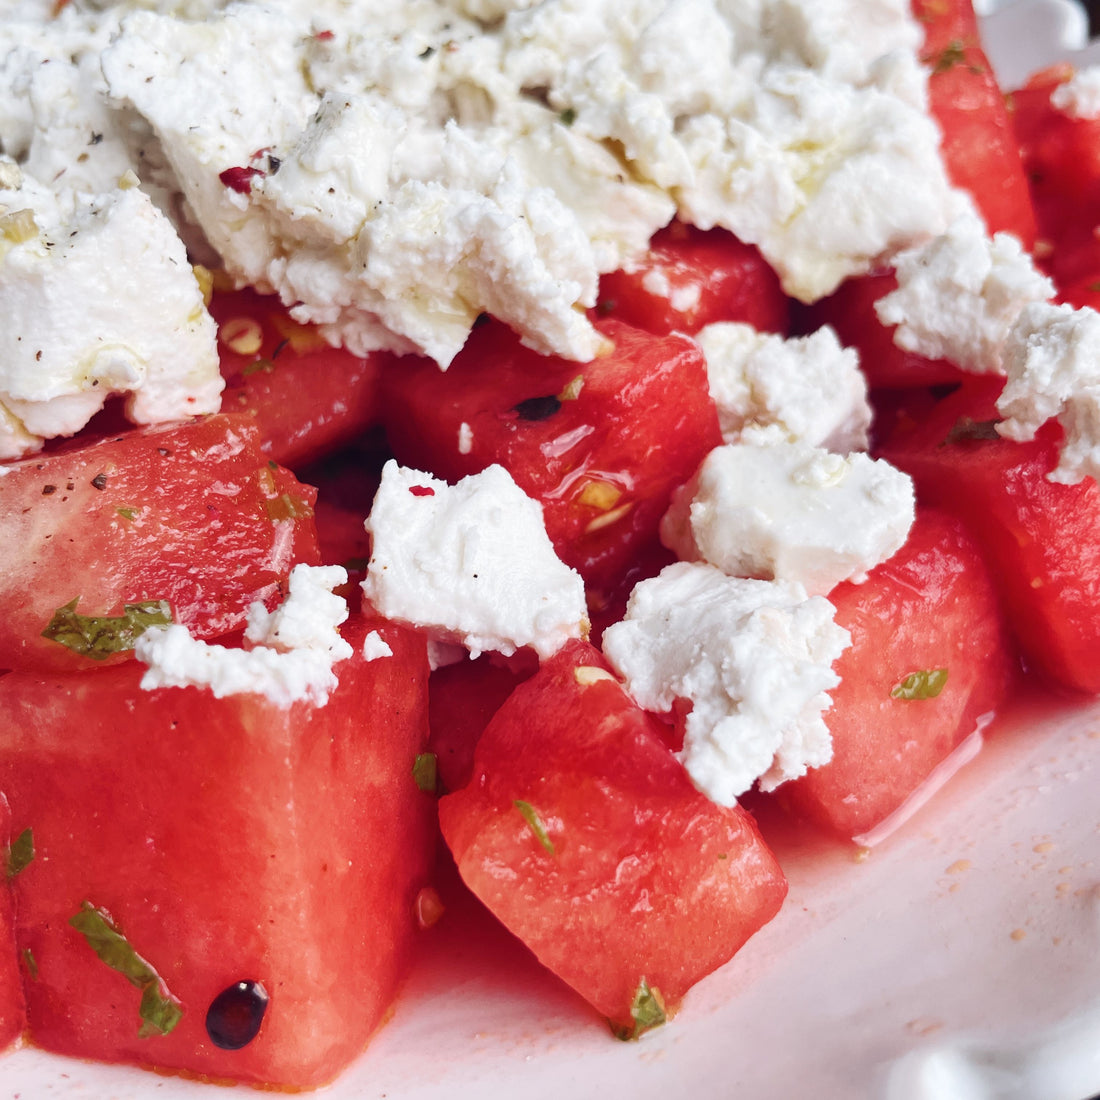 Juicy watermelon sprinkled with mint and Kinda Co Greek Style cheese